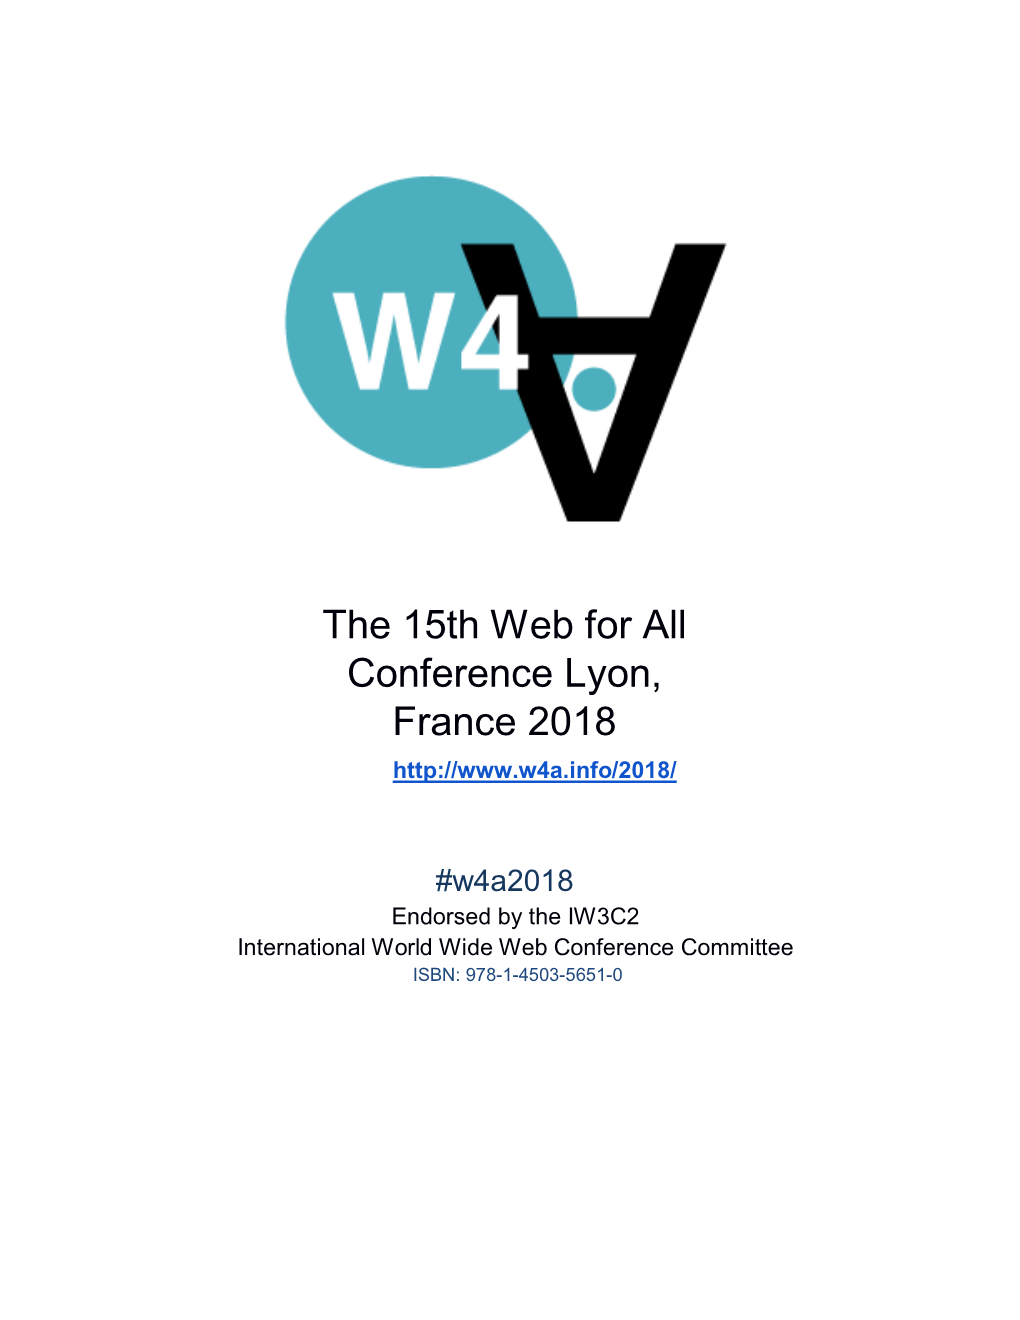 The 15Th Web for All Conference Lyon, France 2018